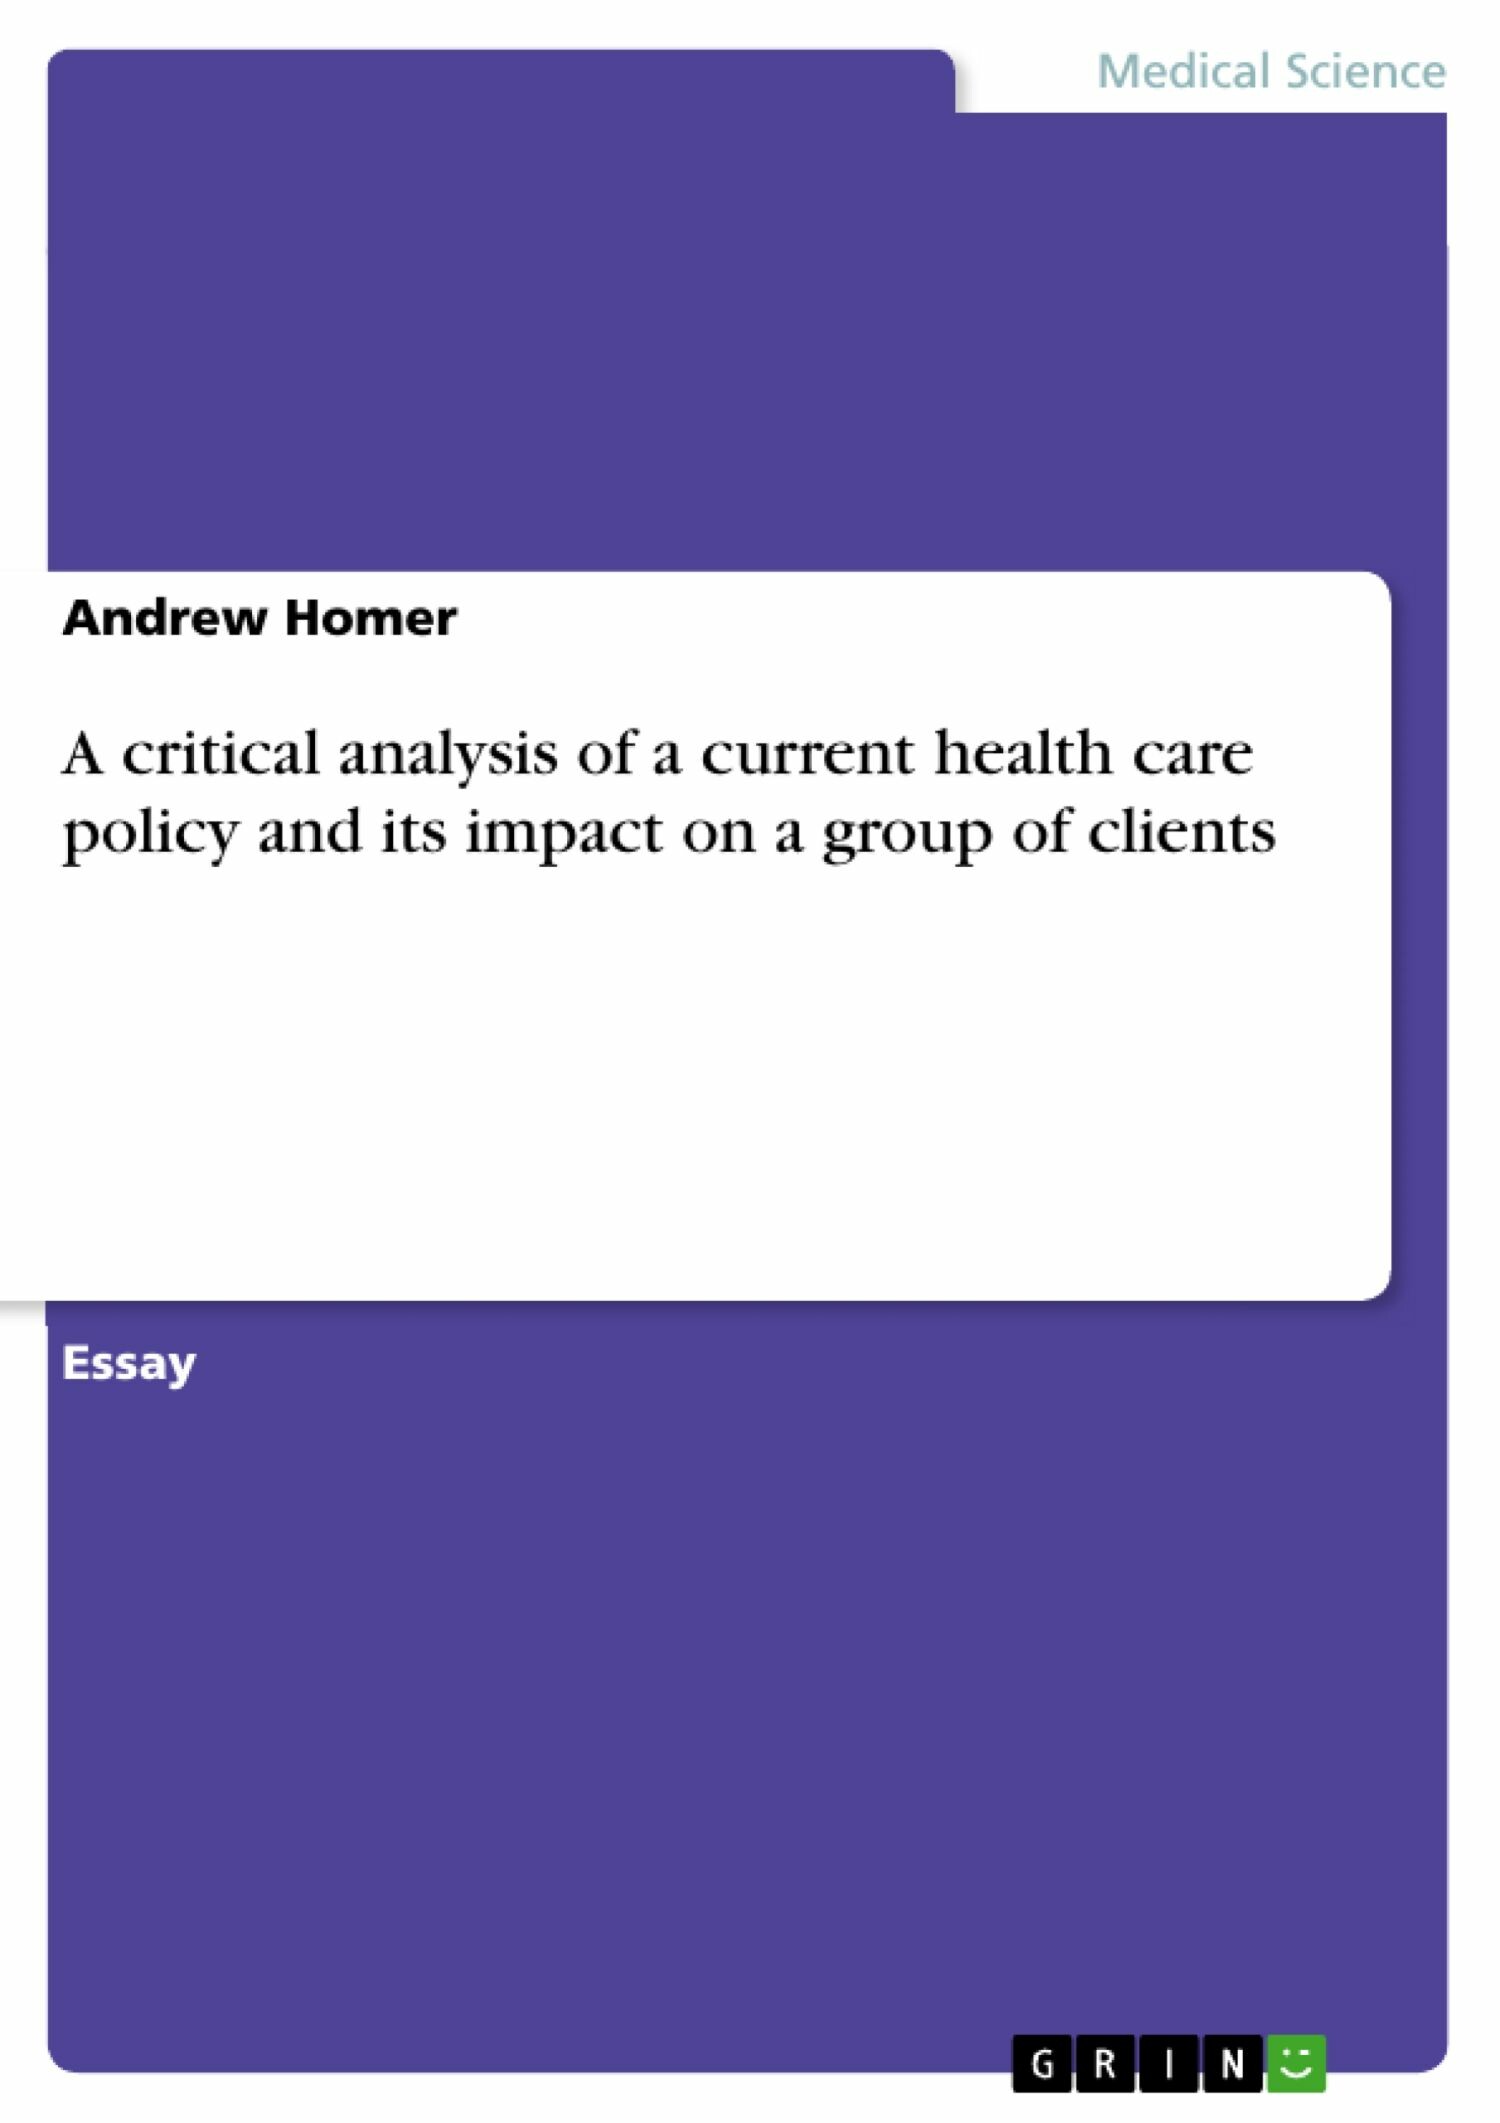 A critical analysis of a current health care policy and its impact on a group of clients